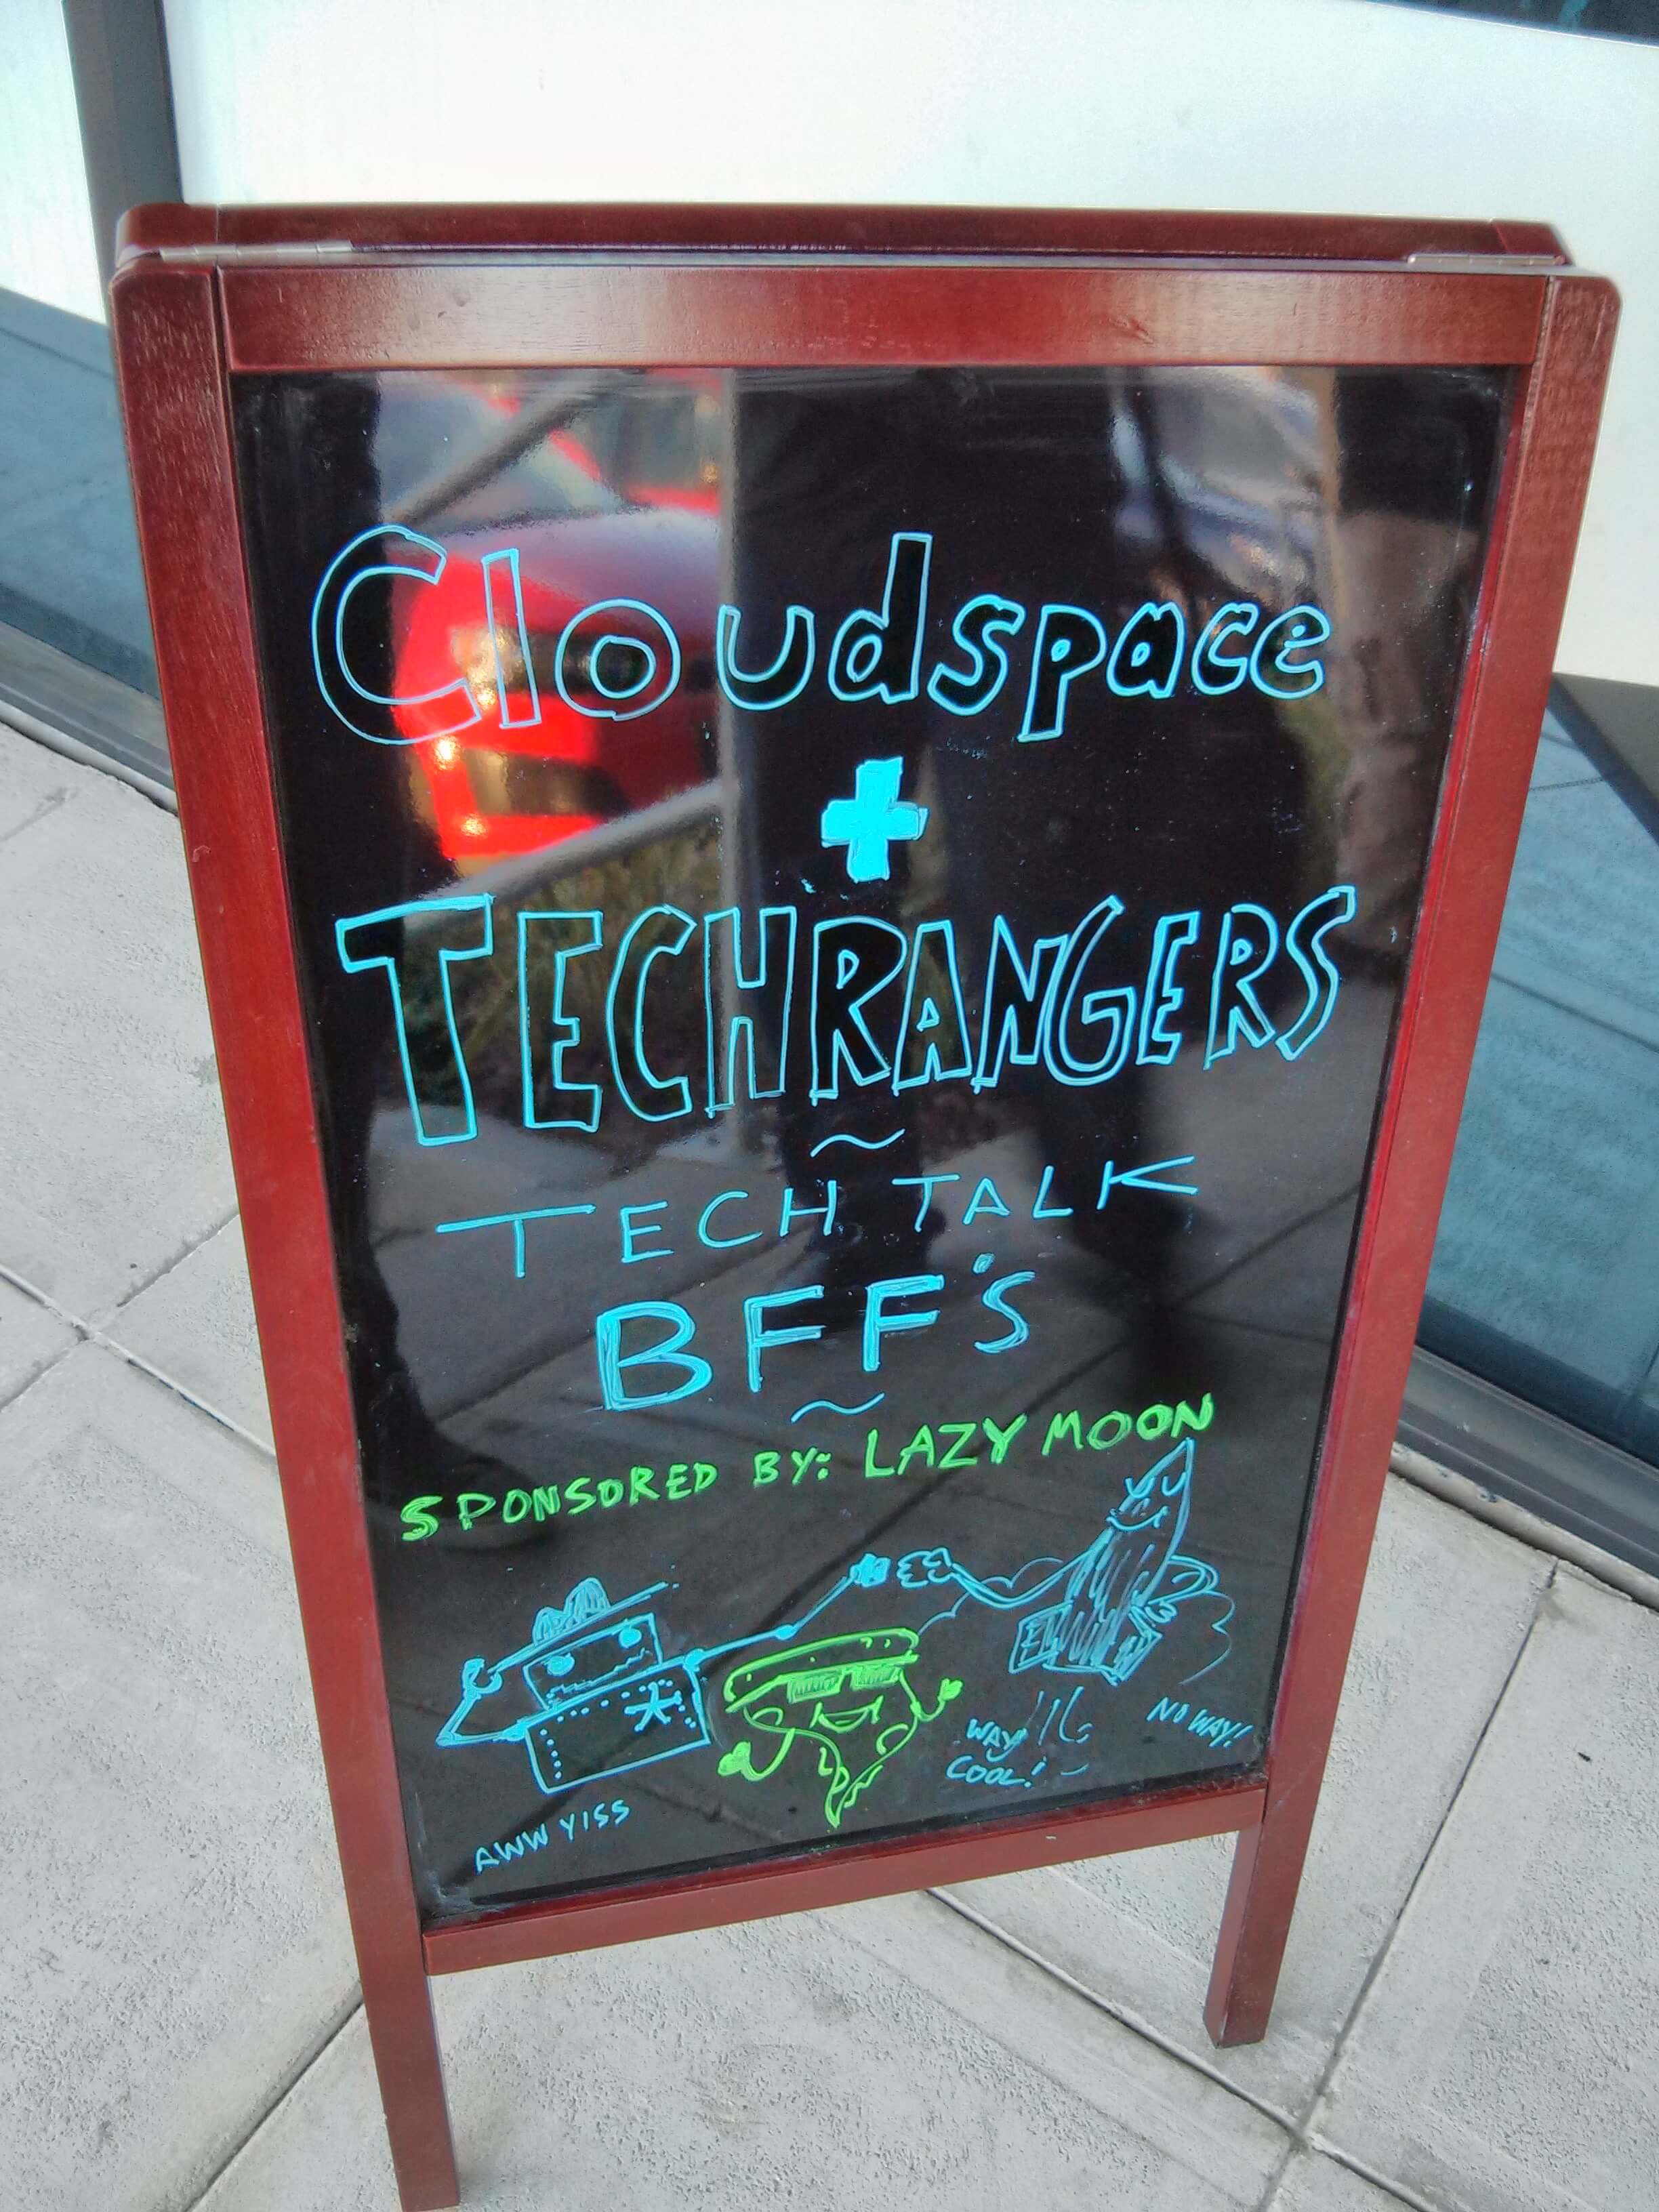 Photo of the Cloudspace Techranger first meetup sign.